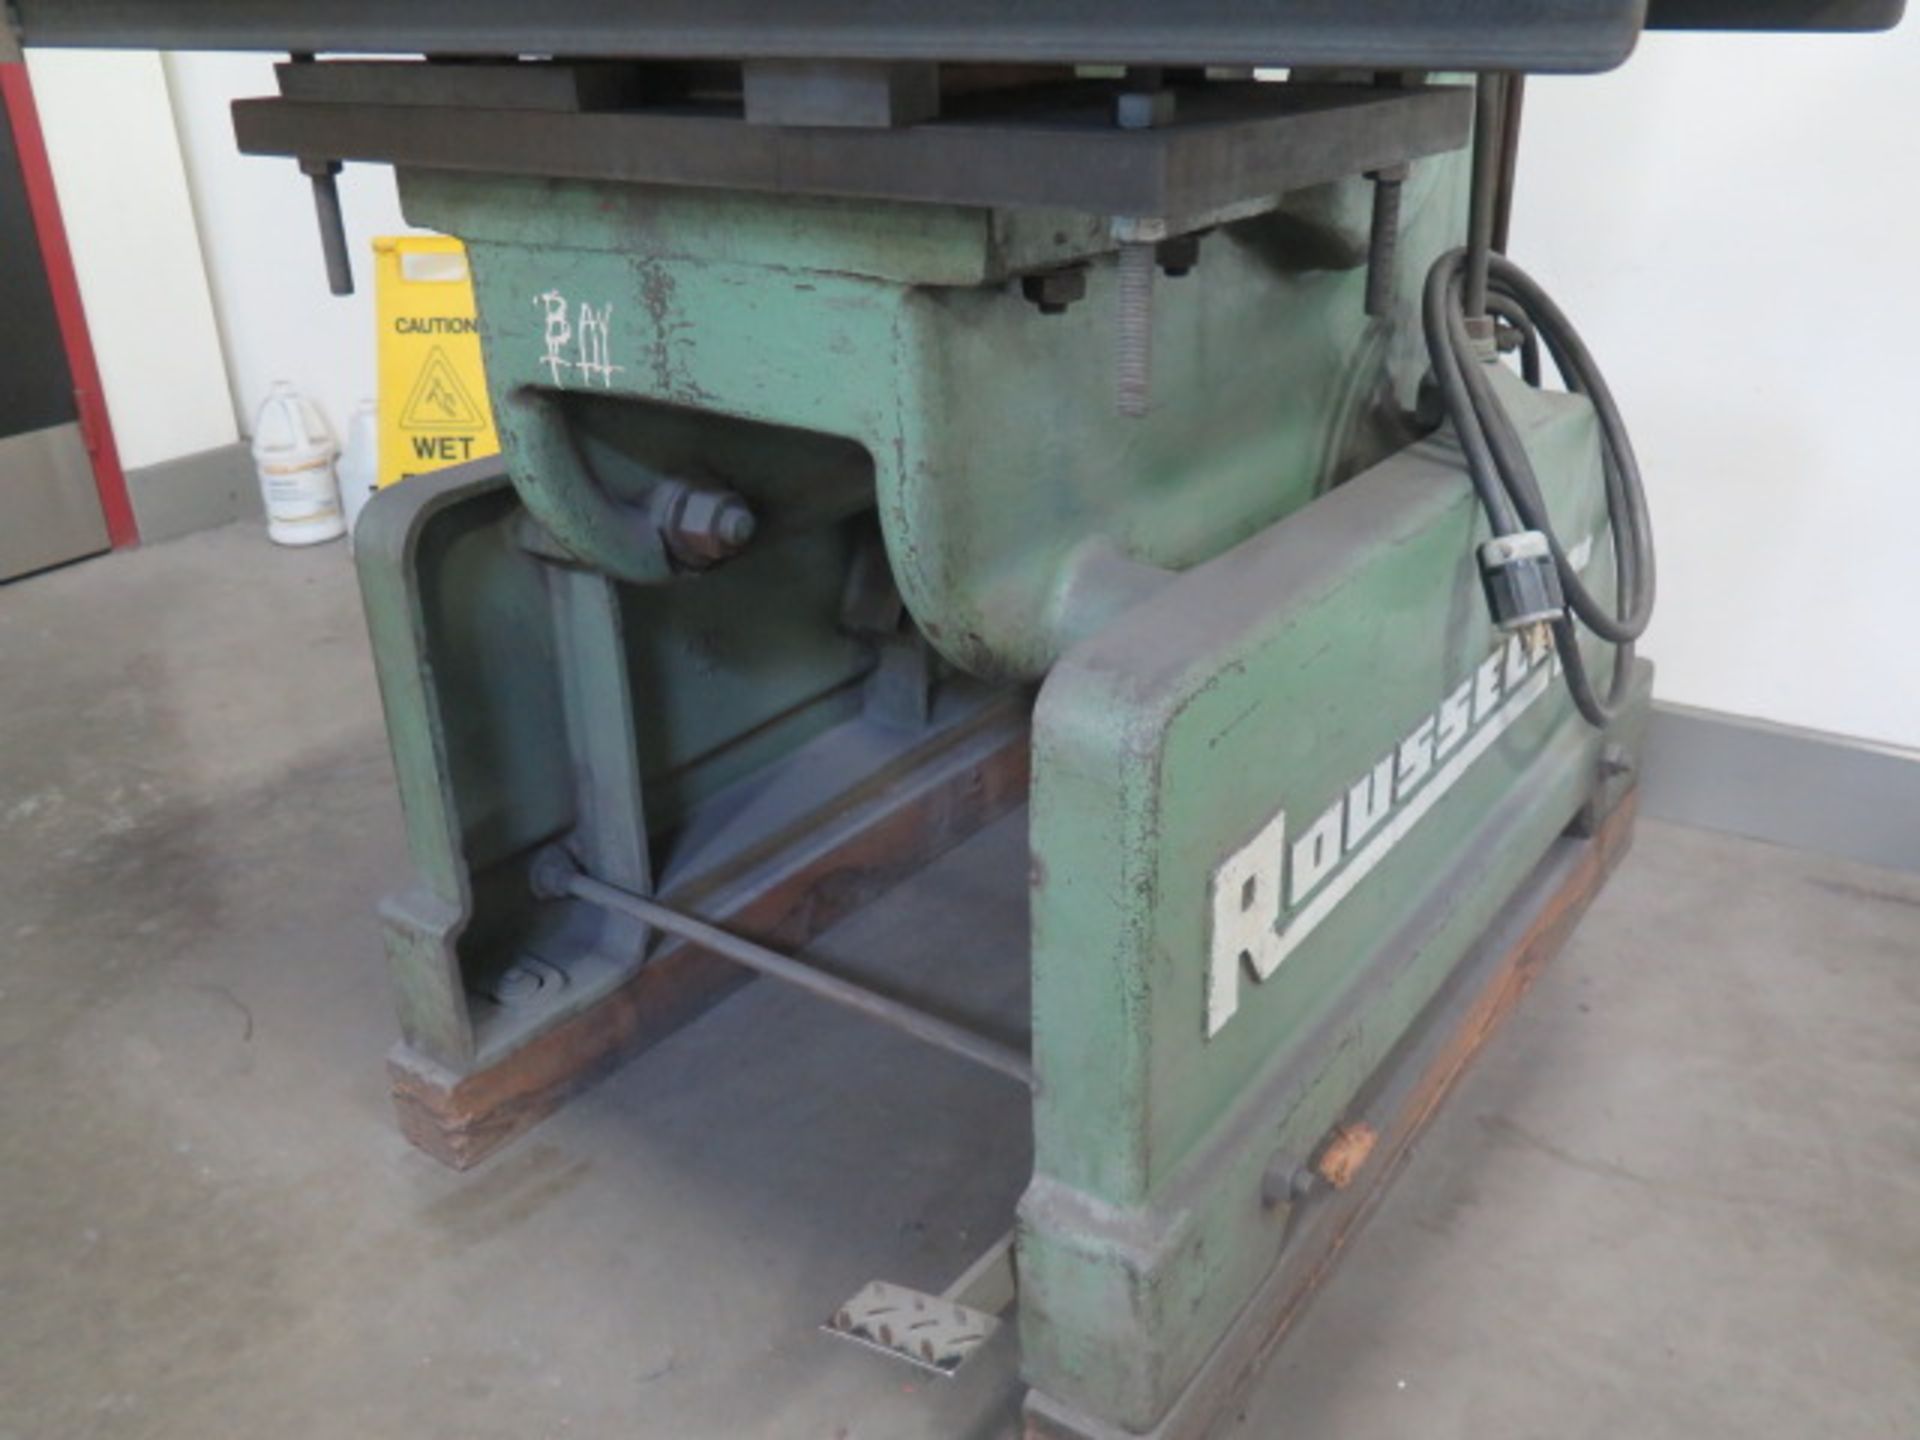 Rousselle No.3F 25 Ton OBI Stamping Press s/n DFS11976 w/ 125 Strokes/Min, 14” x 20” Bolster Area - Image 7 of 9